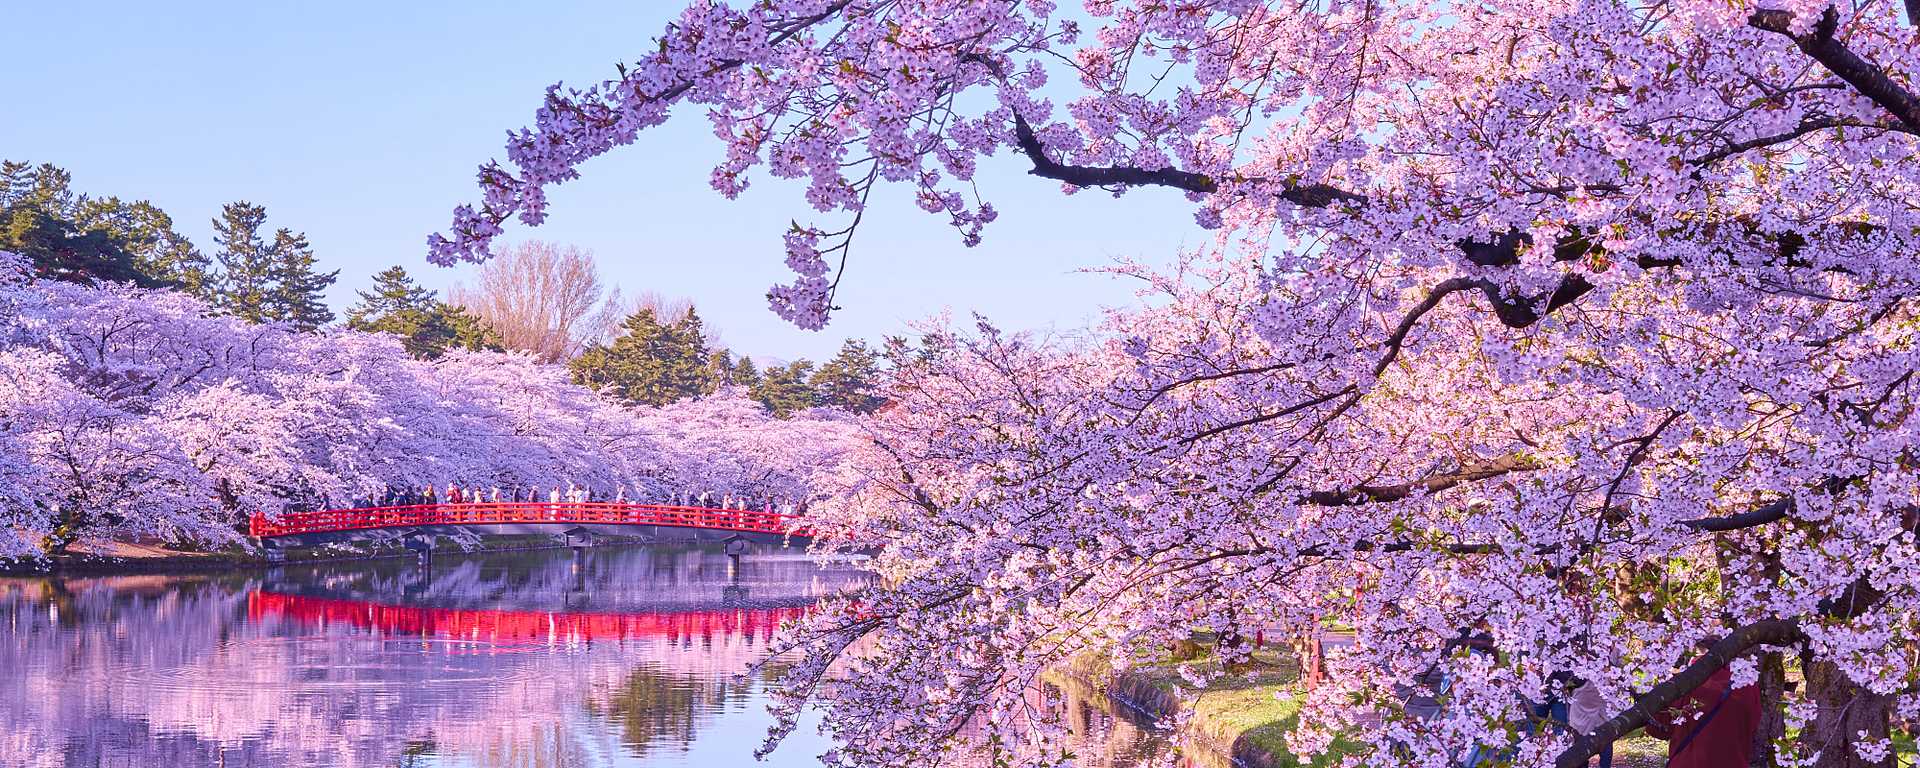 Bridge crossing a river lined with blooming cherry blossoms in Hirosaki Park, Japan